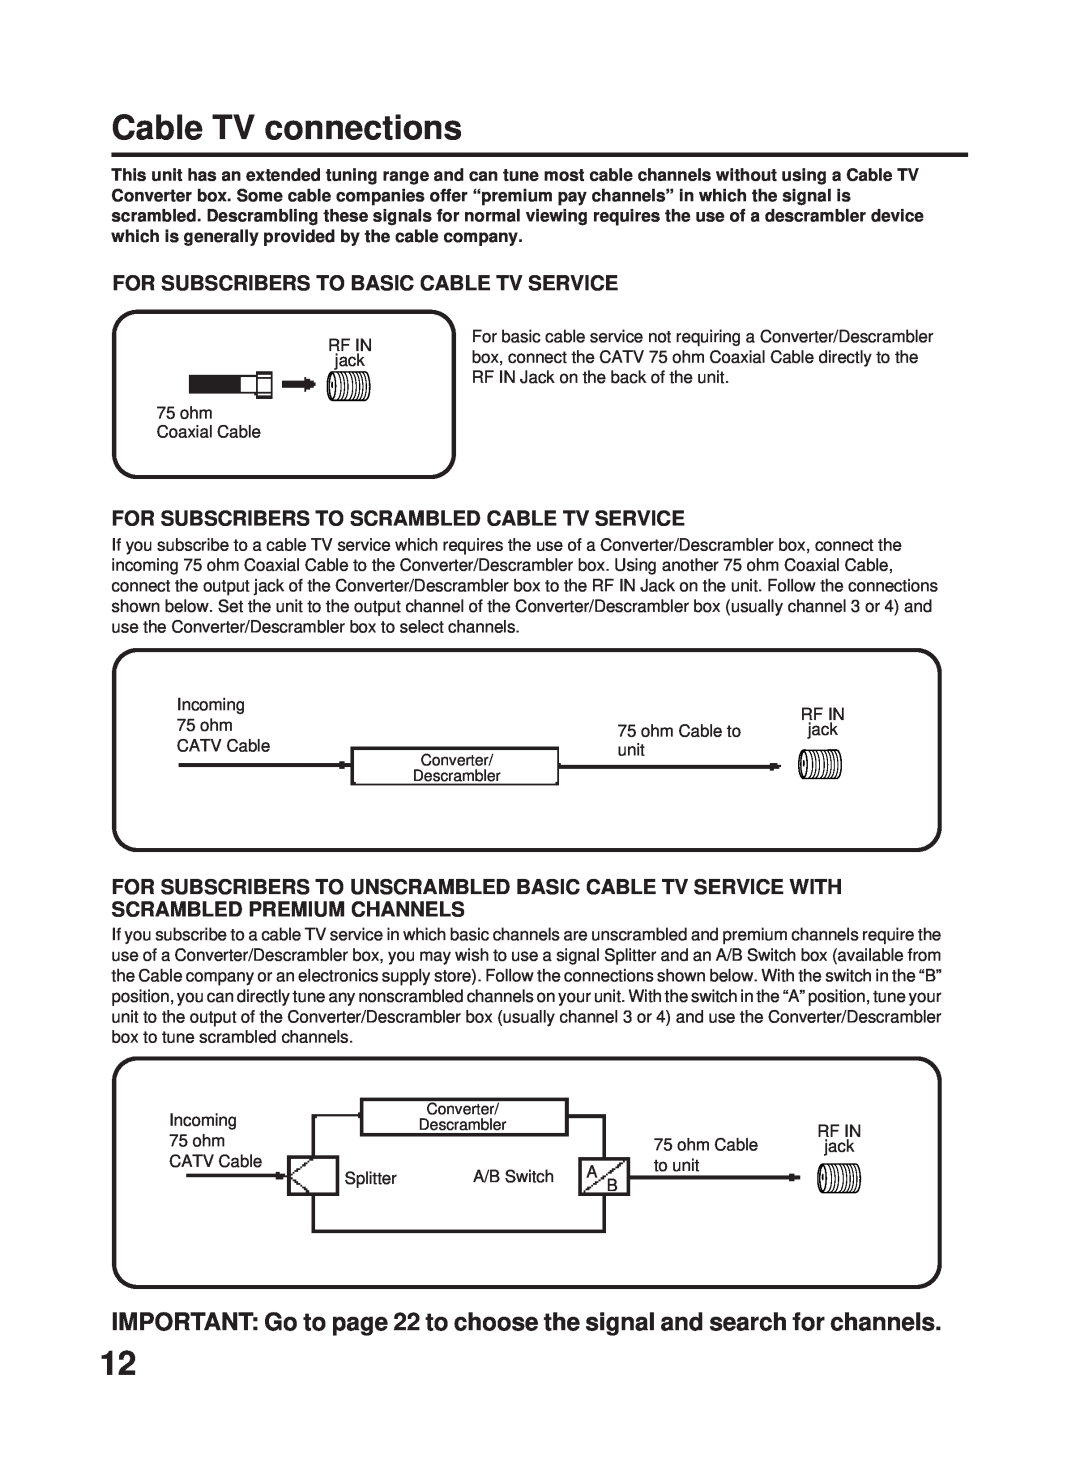 RCA 27F500TDV manual Cable TV connections, IMPORTANT Go to page 22 to choose the signal and search for channels 